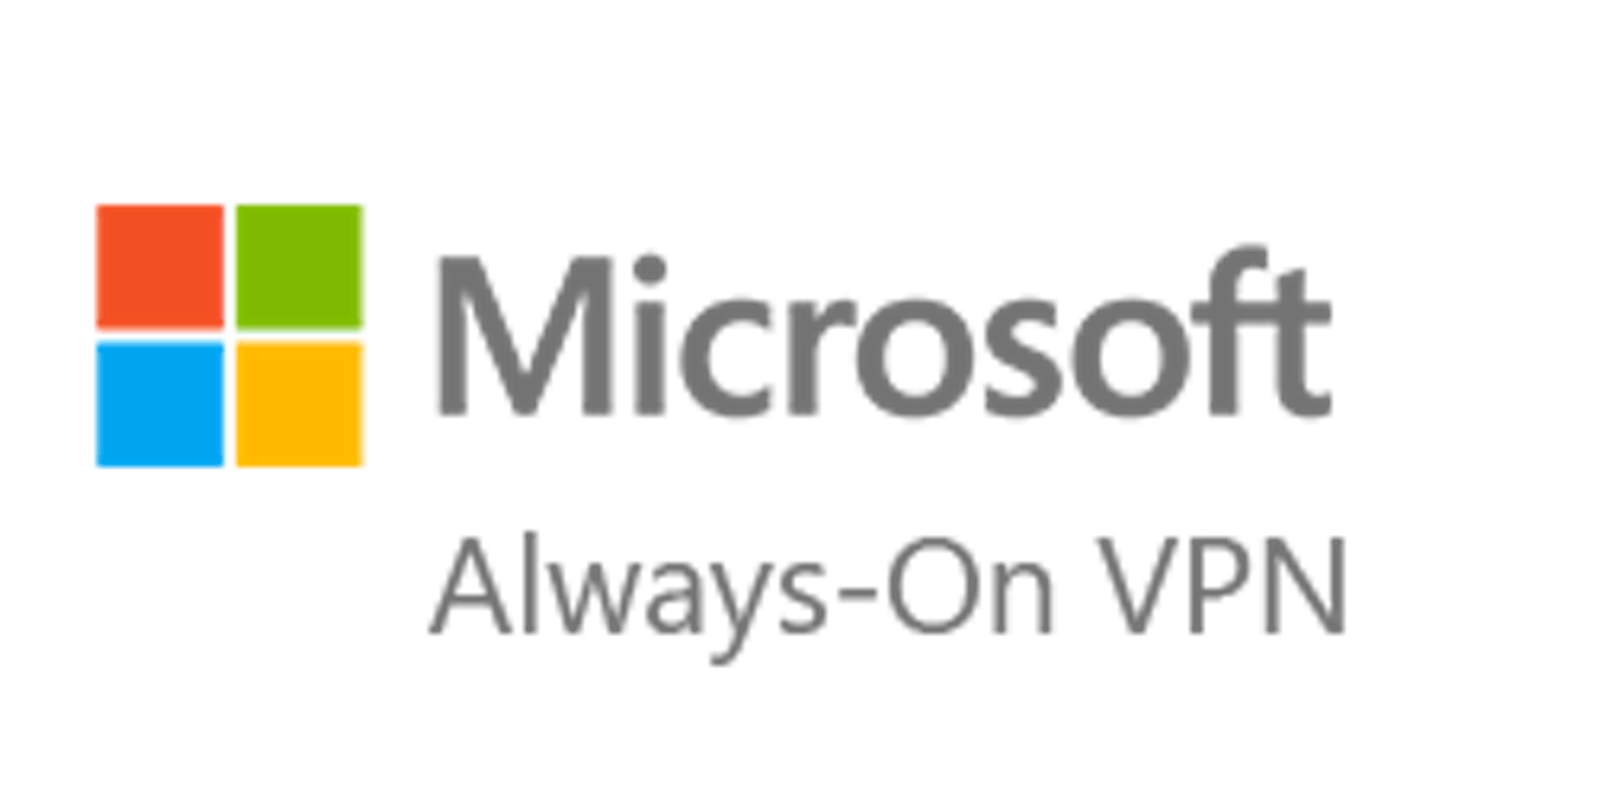 Microsoft Always On VPN - The pinnacle of Sys Administration Projects?